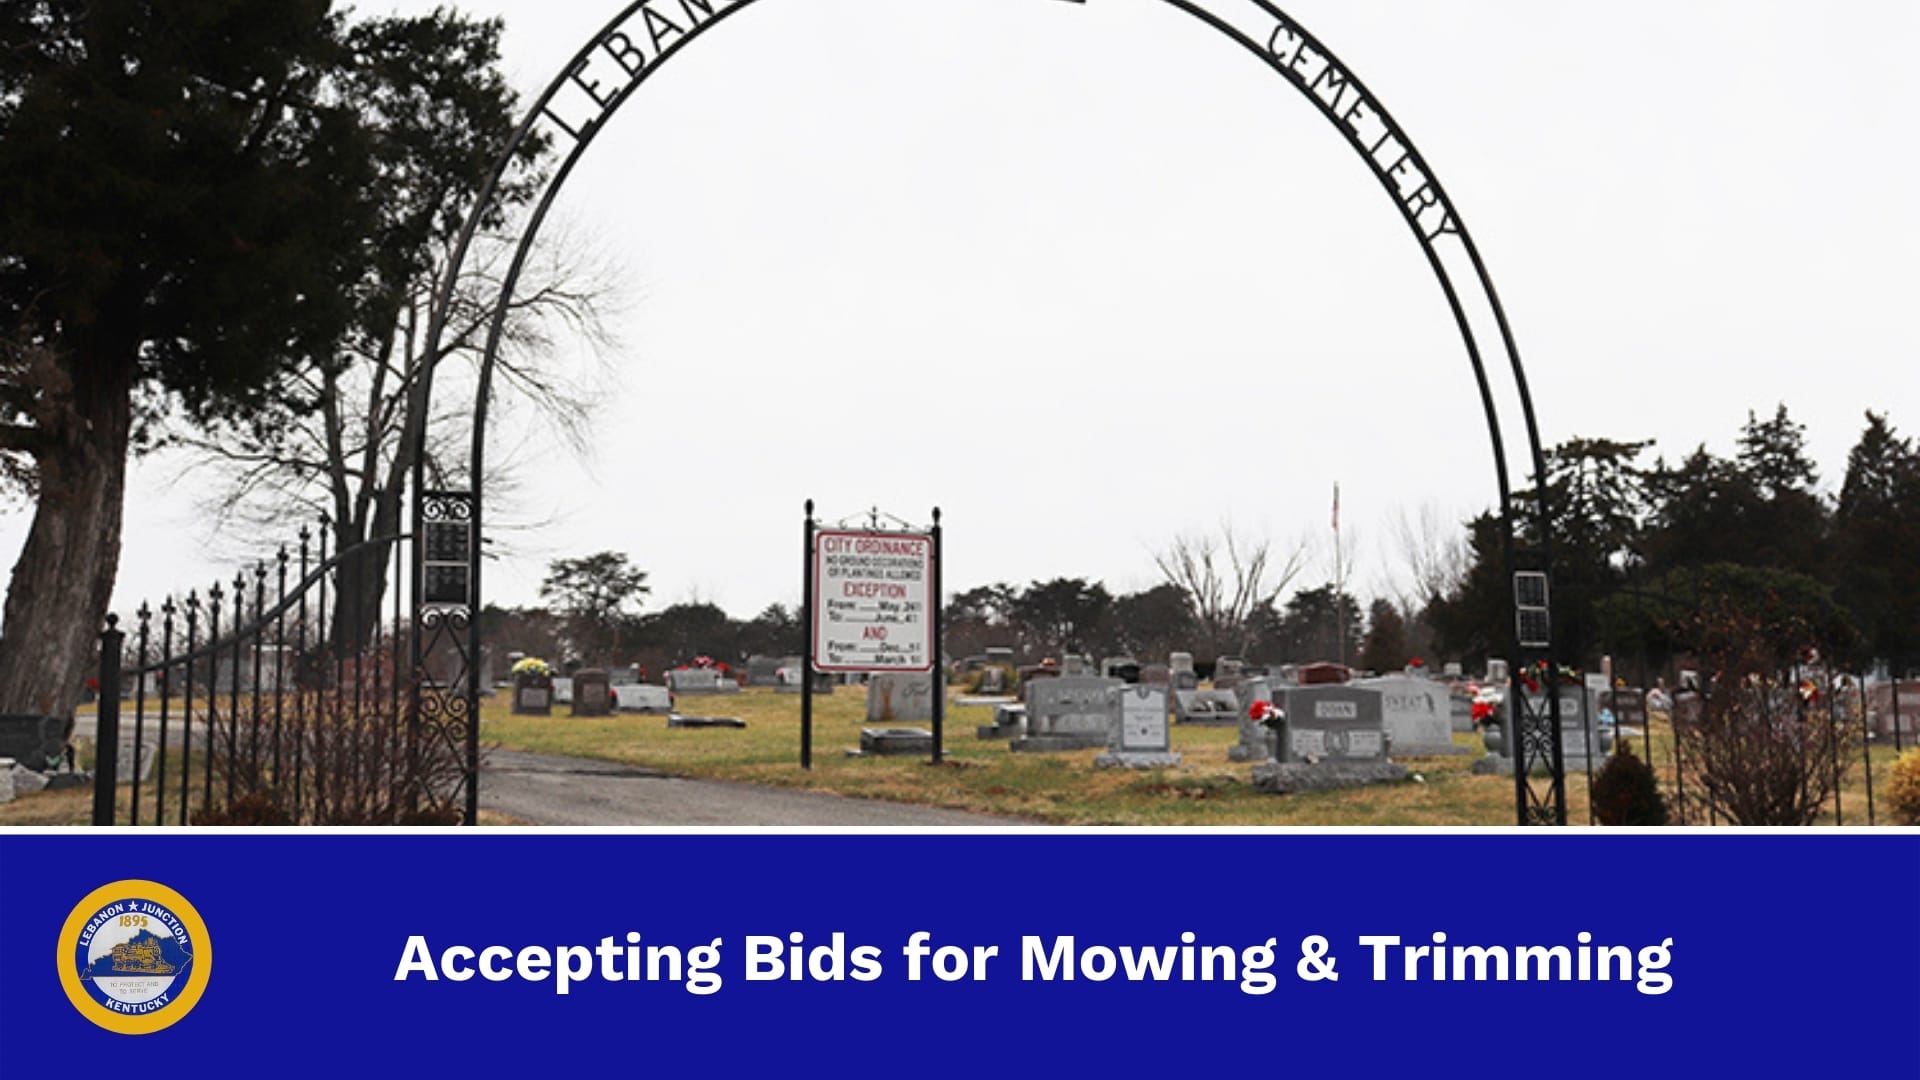 Lebanon Junction Cemetery with 'Accepting Bids for Mowing & Trimming' on image sidebar